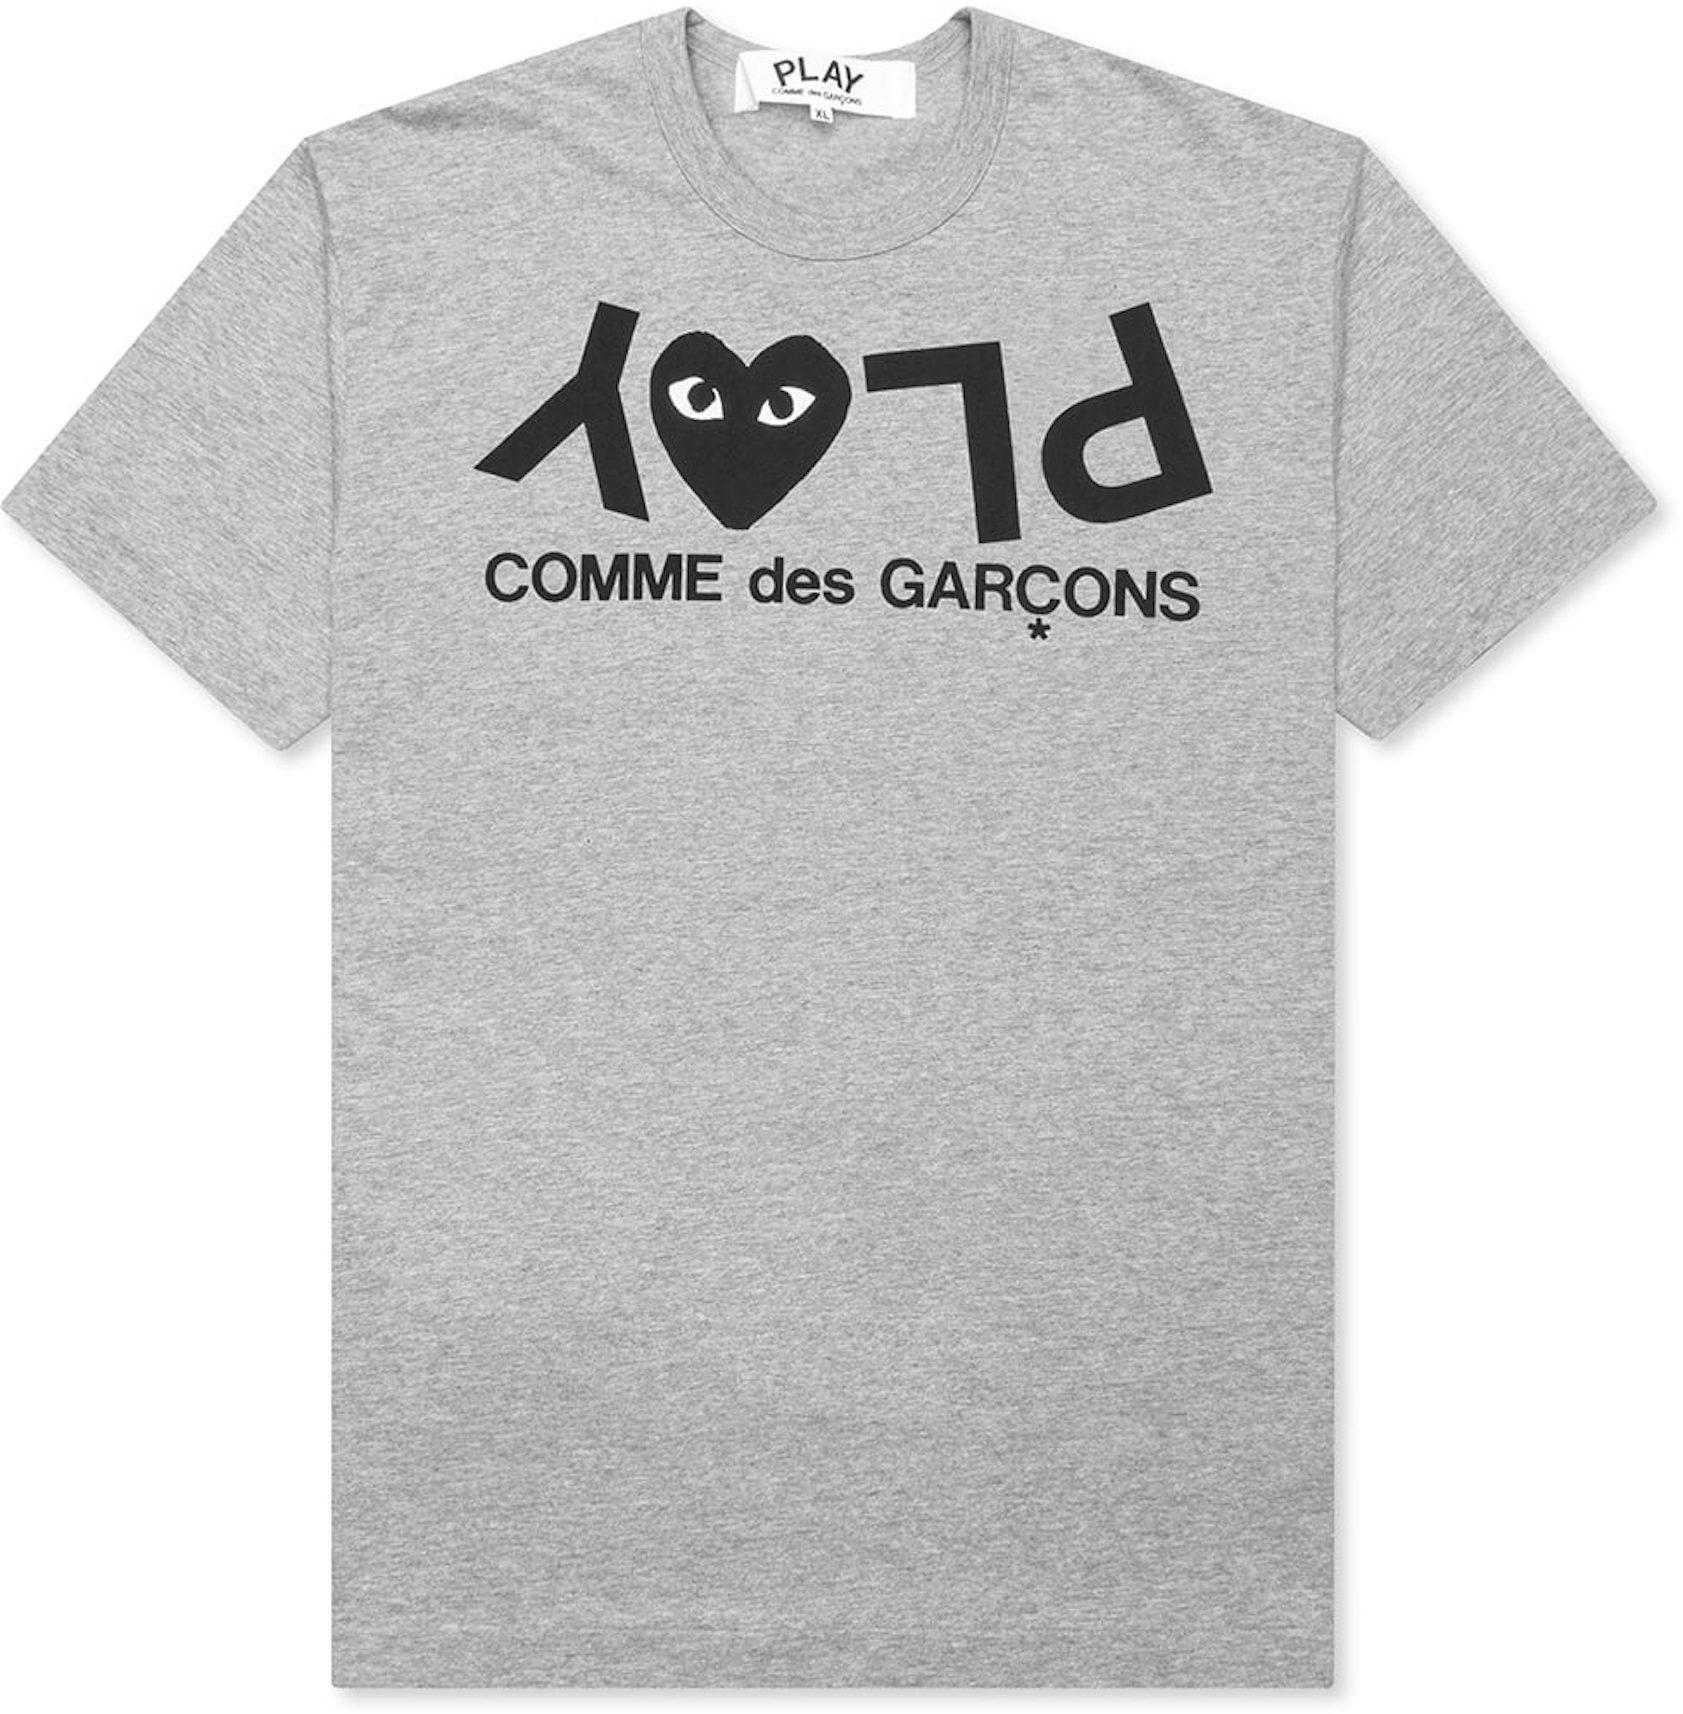 Comme des Garçons PLAY: The Buyer's Guide - StockX News